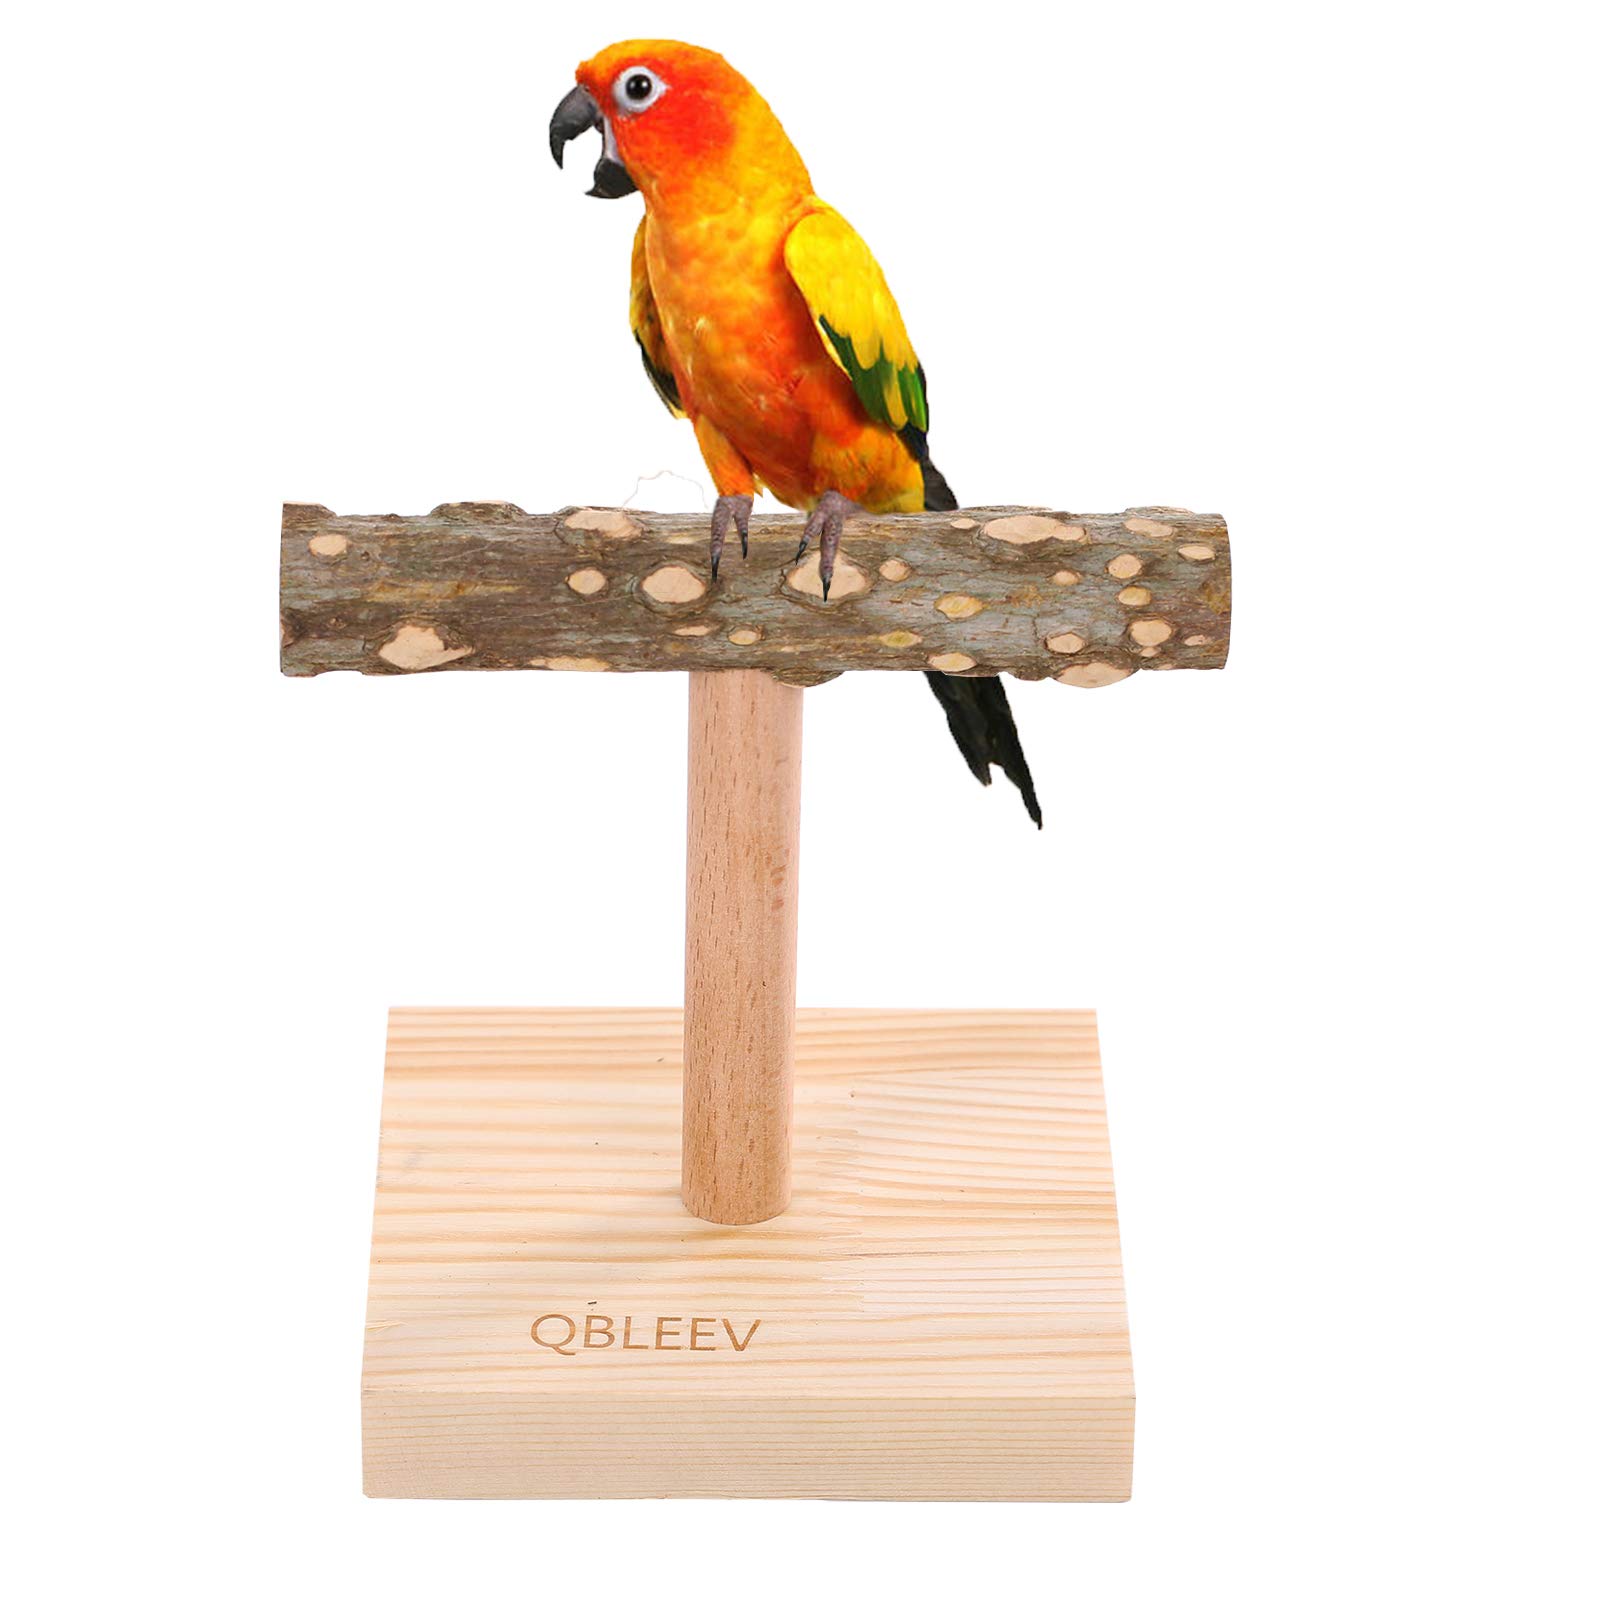 T Shape Bird Perch Stand. Natural Wood Bird Cage Perch For Budgie, Finch,  Parrot